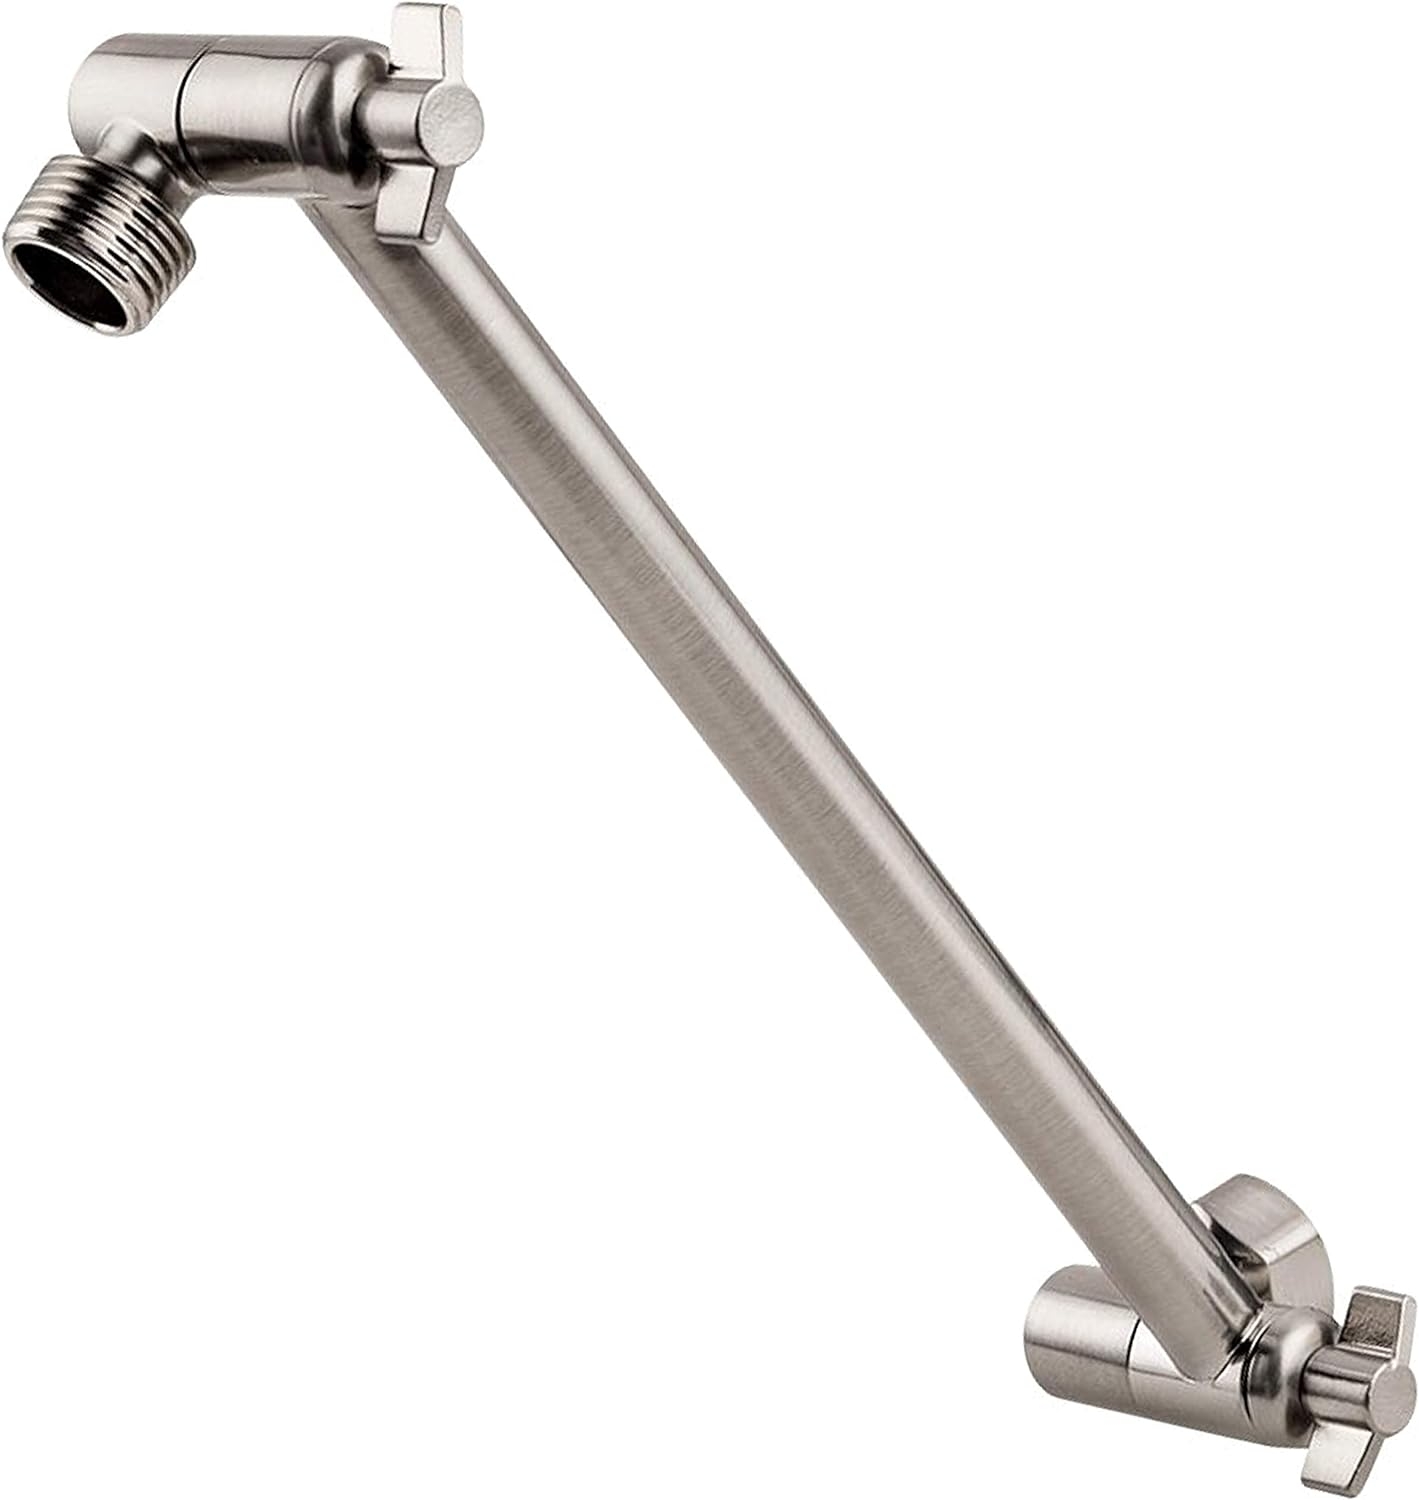 Hotel Spa 11" Solid Brass Adjustable Shower Extension Arm with Lock Joints. Lower or Raise Any Rain or Handheld Showerhead to Your Height & Angle / 2-Foot Range – Universal Connection, Brushed Nickel